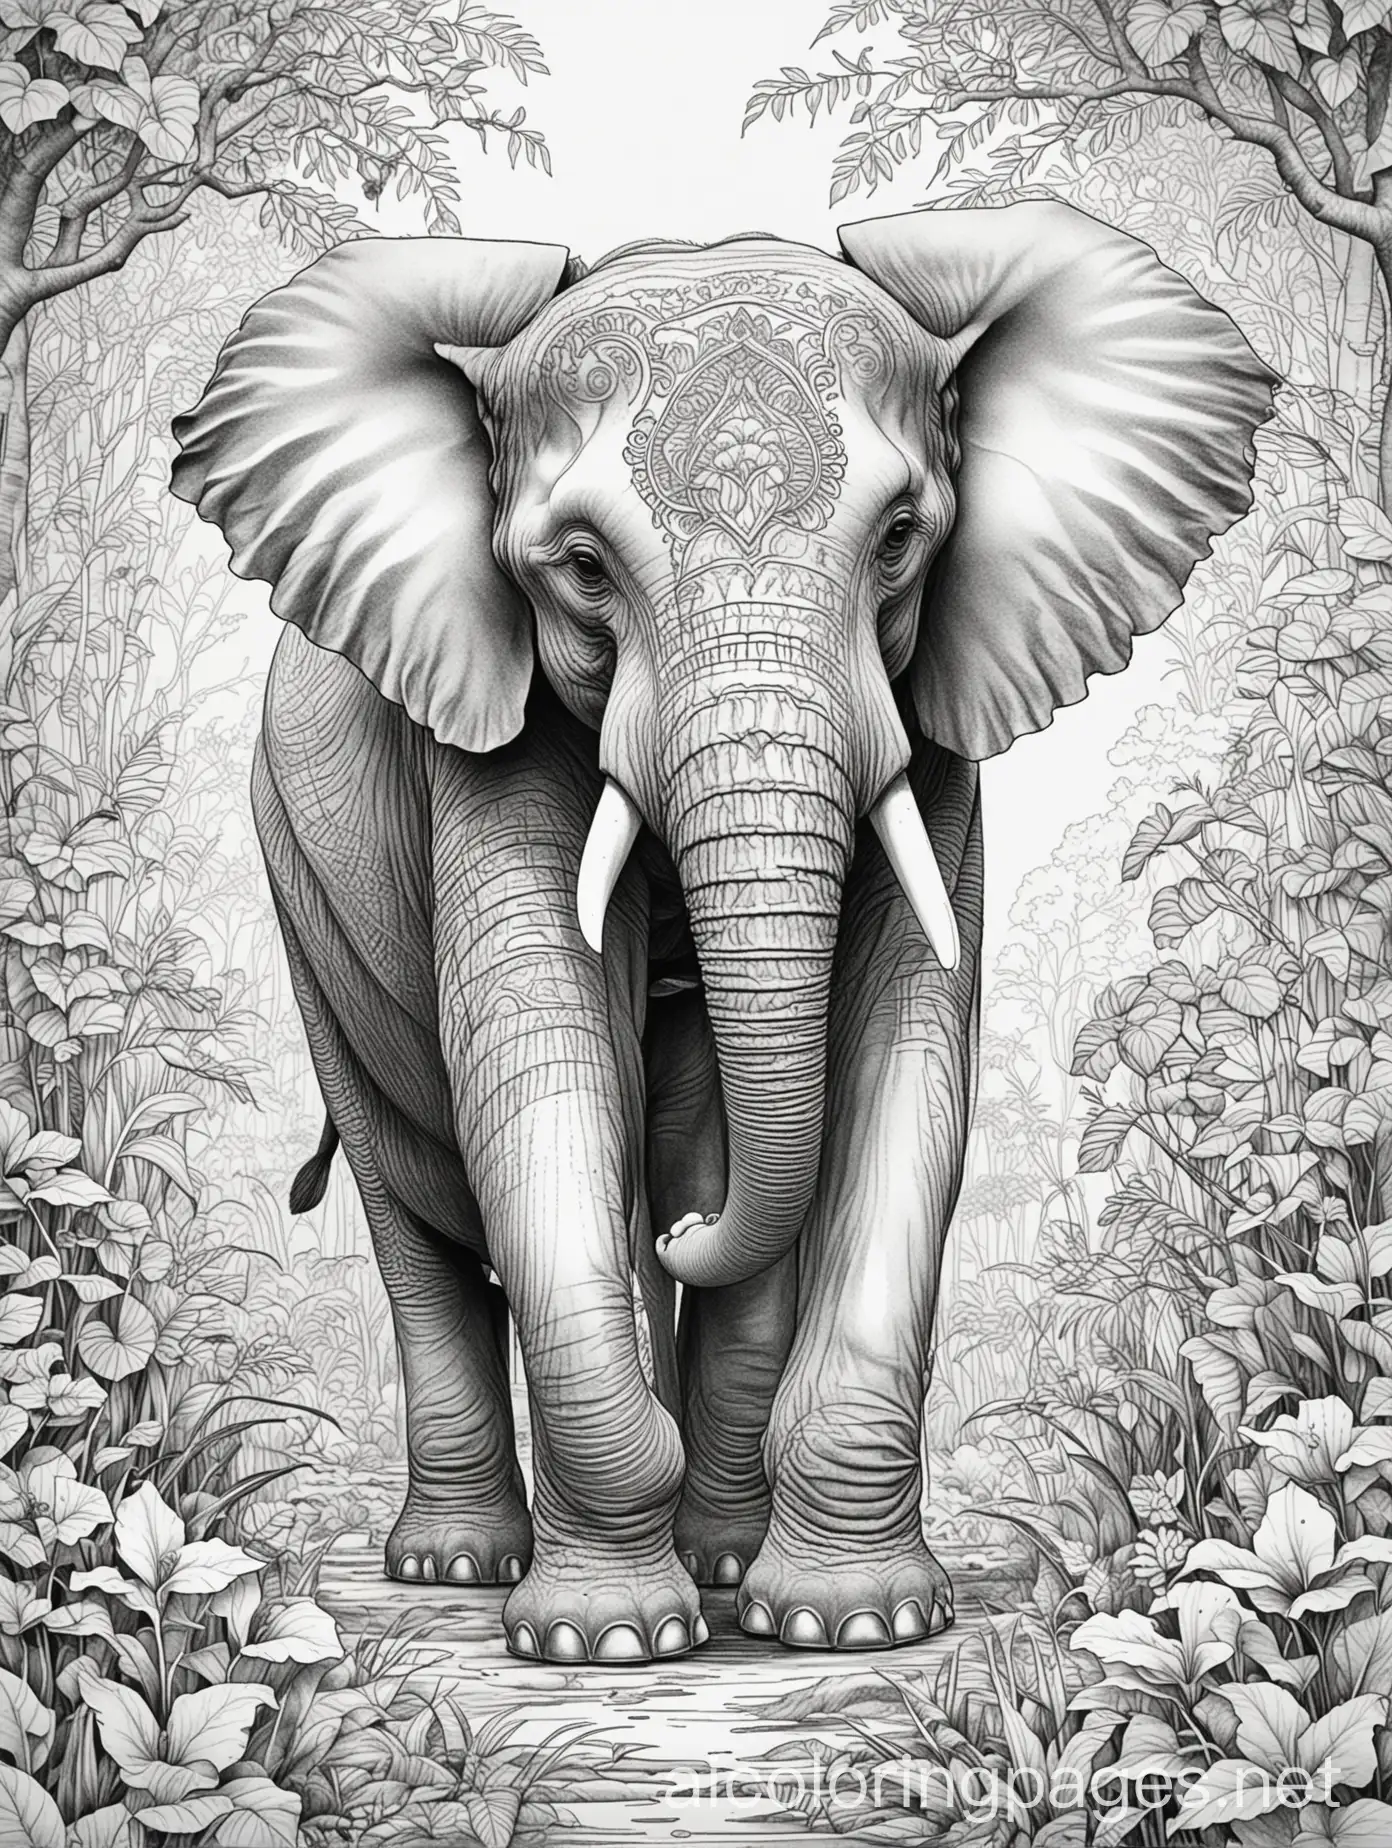 line work, coloring book, majestic elephants, jungle fantasy, intricate, complex, no shading, zen, black and white, thick outlines, white background, black ink tattoo design, Coloring Page, black and white, line art, white background, Simplicity, Ample White Space. The background of the coloring page is plain white to make it easy for young children to color within the lines. The outlines of all the subjects are easy to distinguish, making it simple for kids to color without too much difficulty